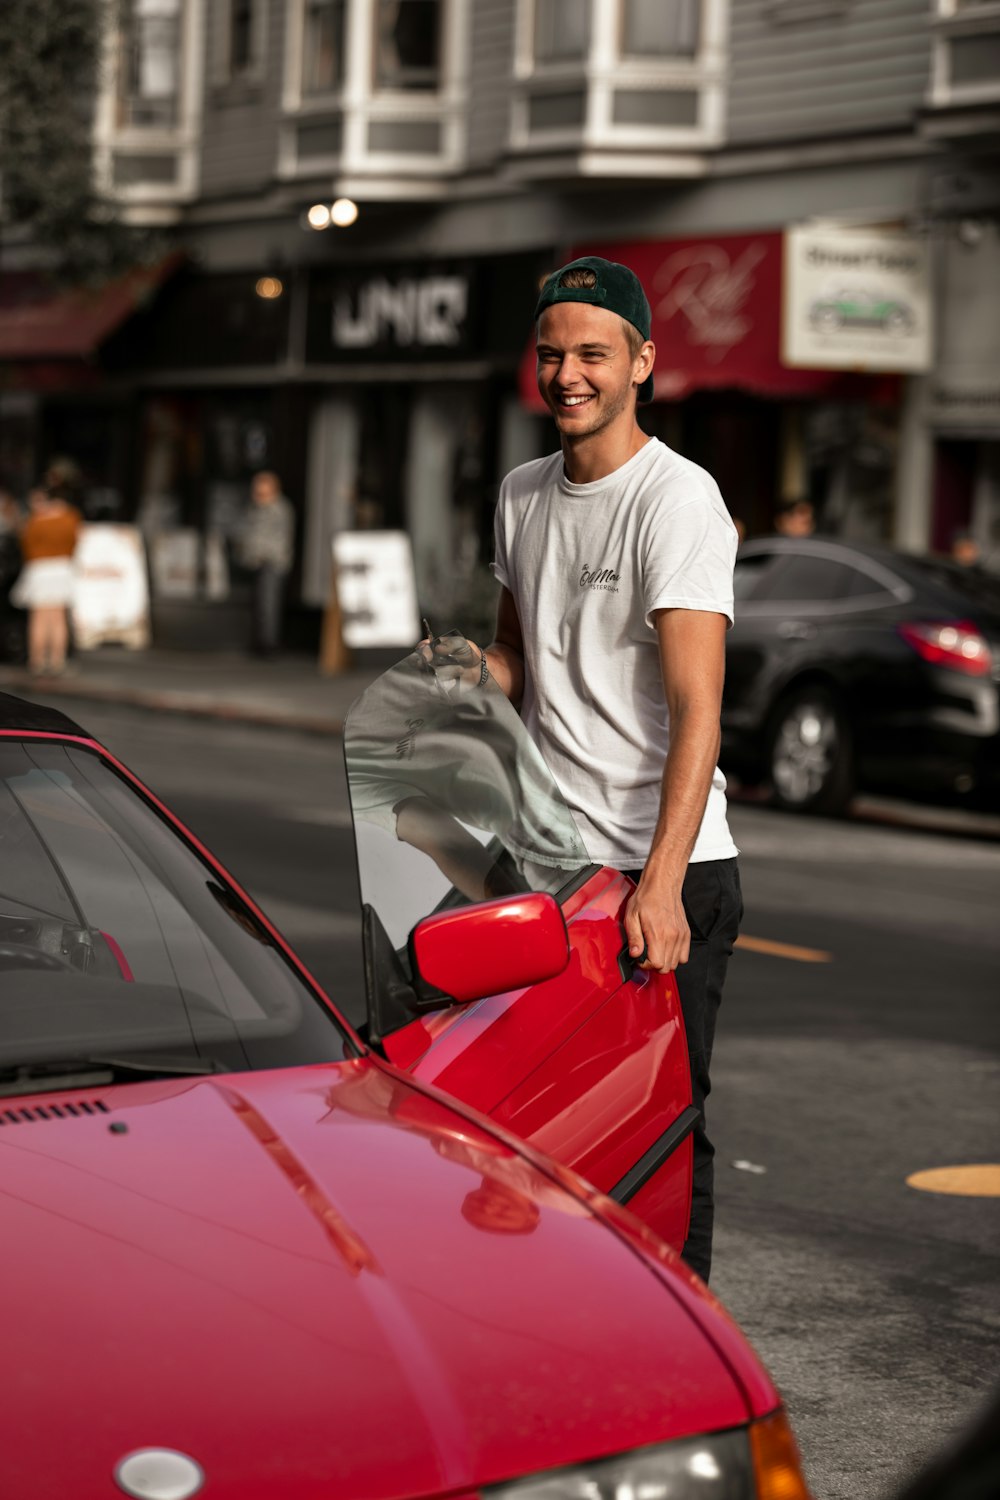 a man standing next to a red car on a city street